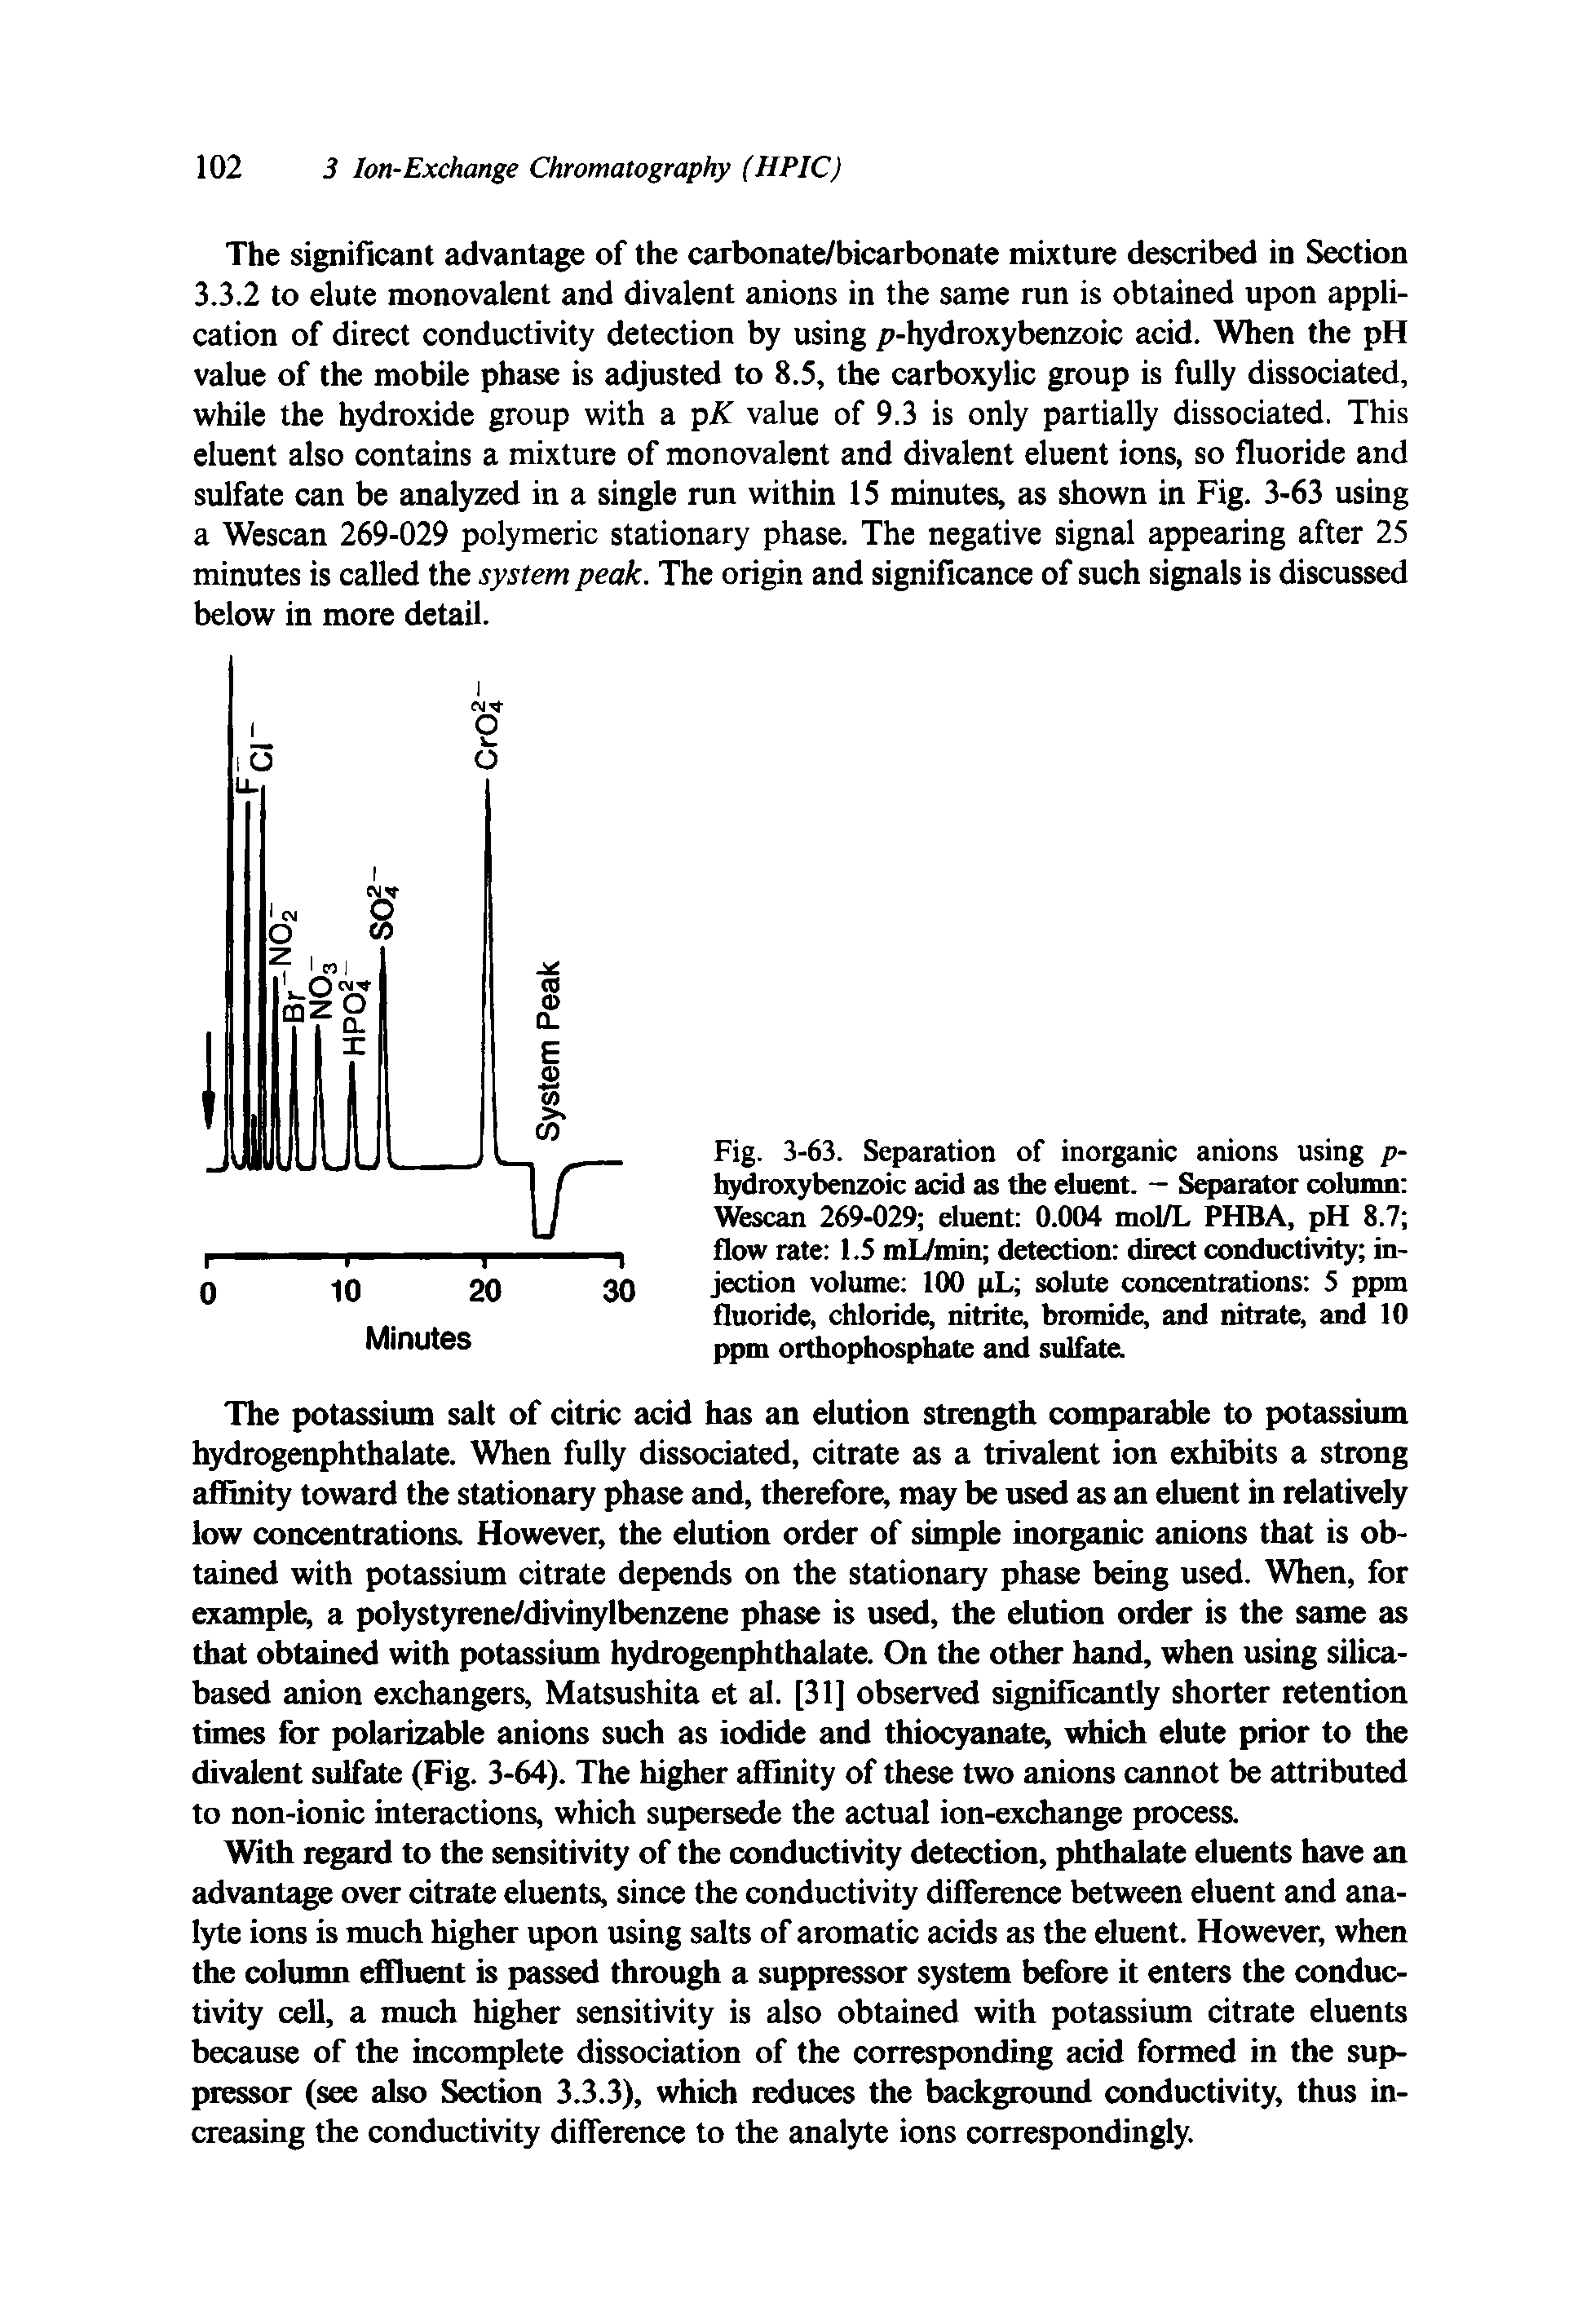 Fig. 3-63. Separation of inorganic anions using p-hydroxybenzoic add as the eluent. - Separator column Wescan 269-029 eluent 0.004 mol/L PHBA, pH 8.7 flow rate 1.5 mL/min detection direct conductivity injection volume 100 pL solute concentrations 5 ppm fluoride, chloride, nitrite, bromide, and nitrate, and 10 ppm orthophosphate and sulfate.